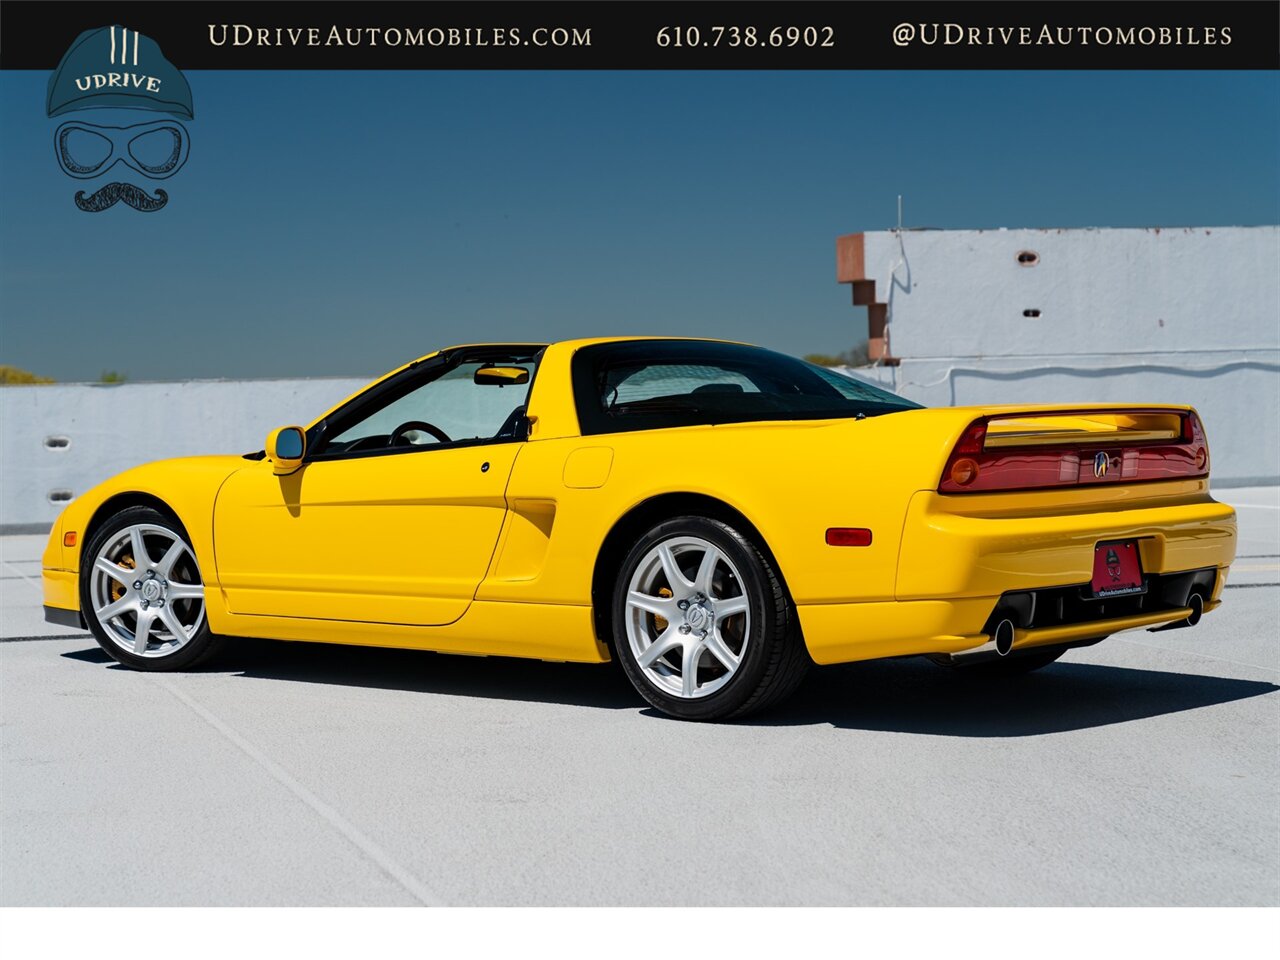 2003 Acura NSX NSX-T  Spa Yellow over Yellow Lthr 1 of 13 Produced - Photo 26 - West Chester, PA 19382